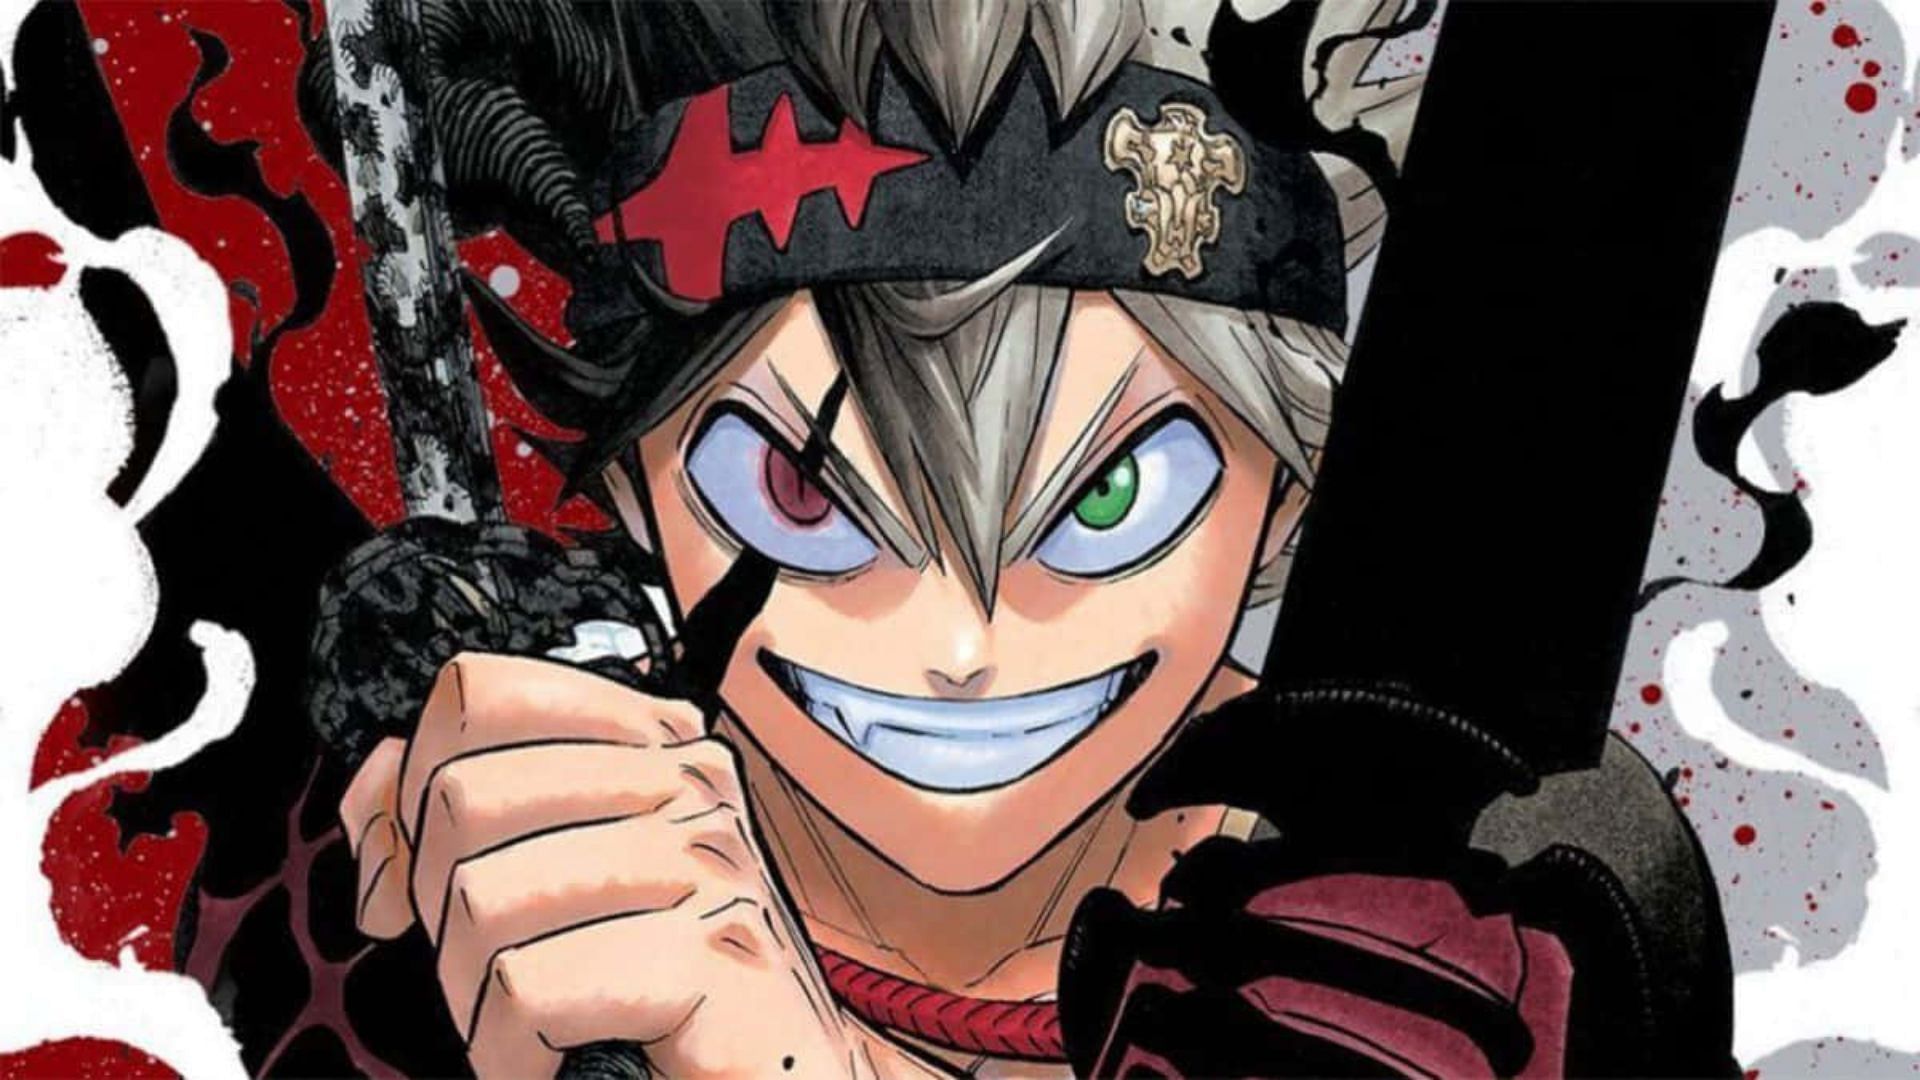 Black Clover volume 36 announcement hints at reason behind upcoming 28-page chapter